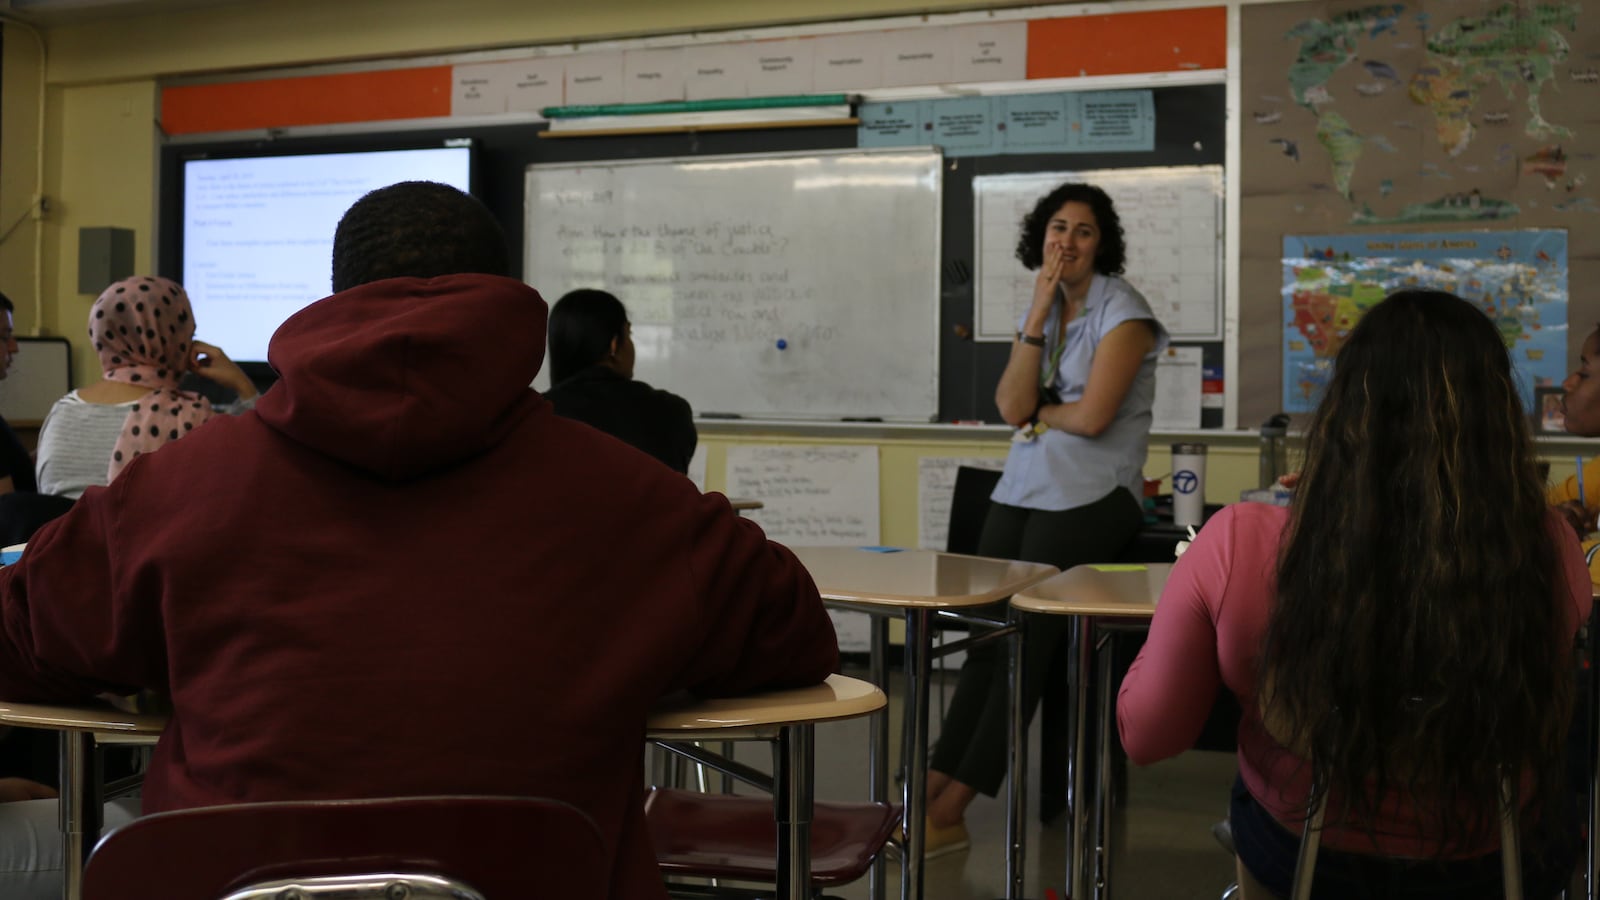 An English teacher chats about "The Crucible" with her class at ELLIS Prep Academy in the Bronx, a transfer school that serves immigrant students.